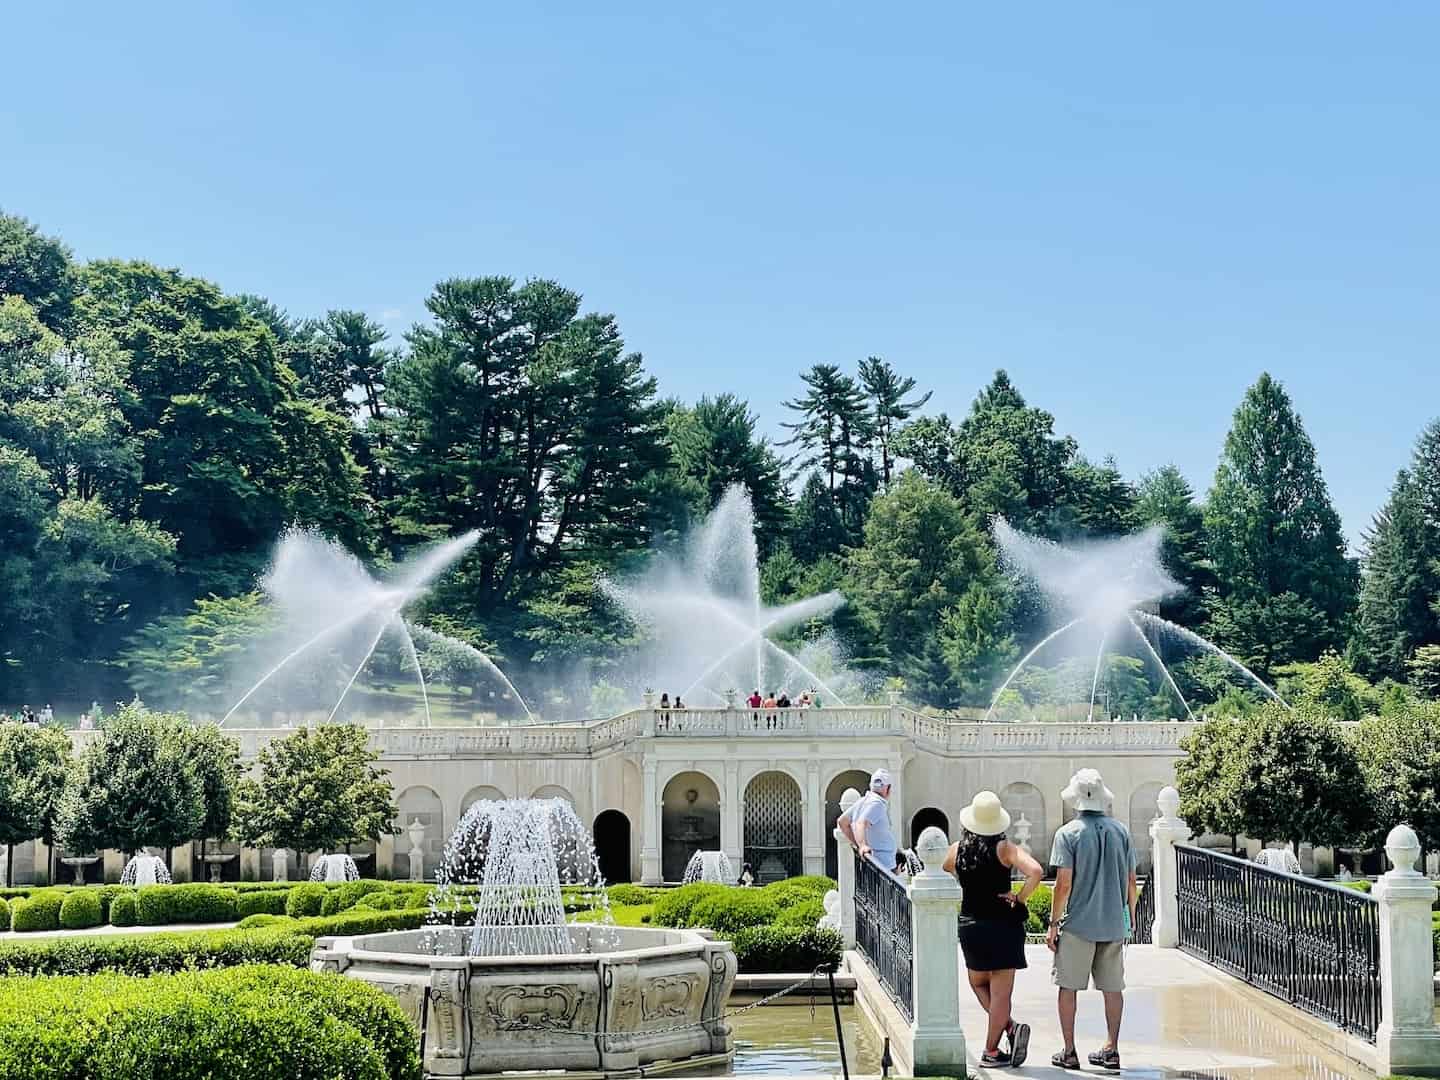 Spectators watch a display of water fountains at Longwood Gardens, PA.